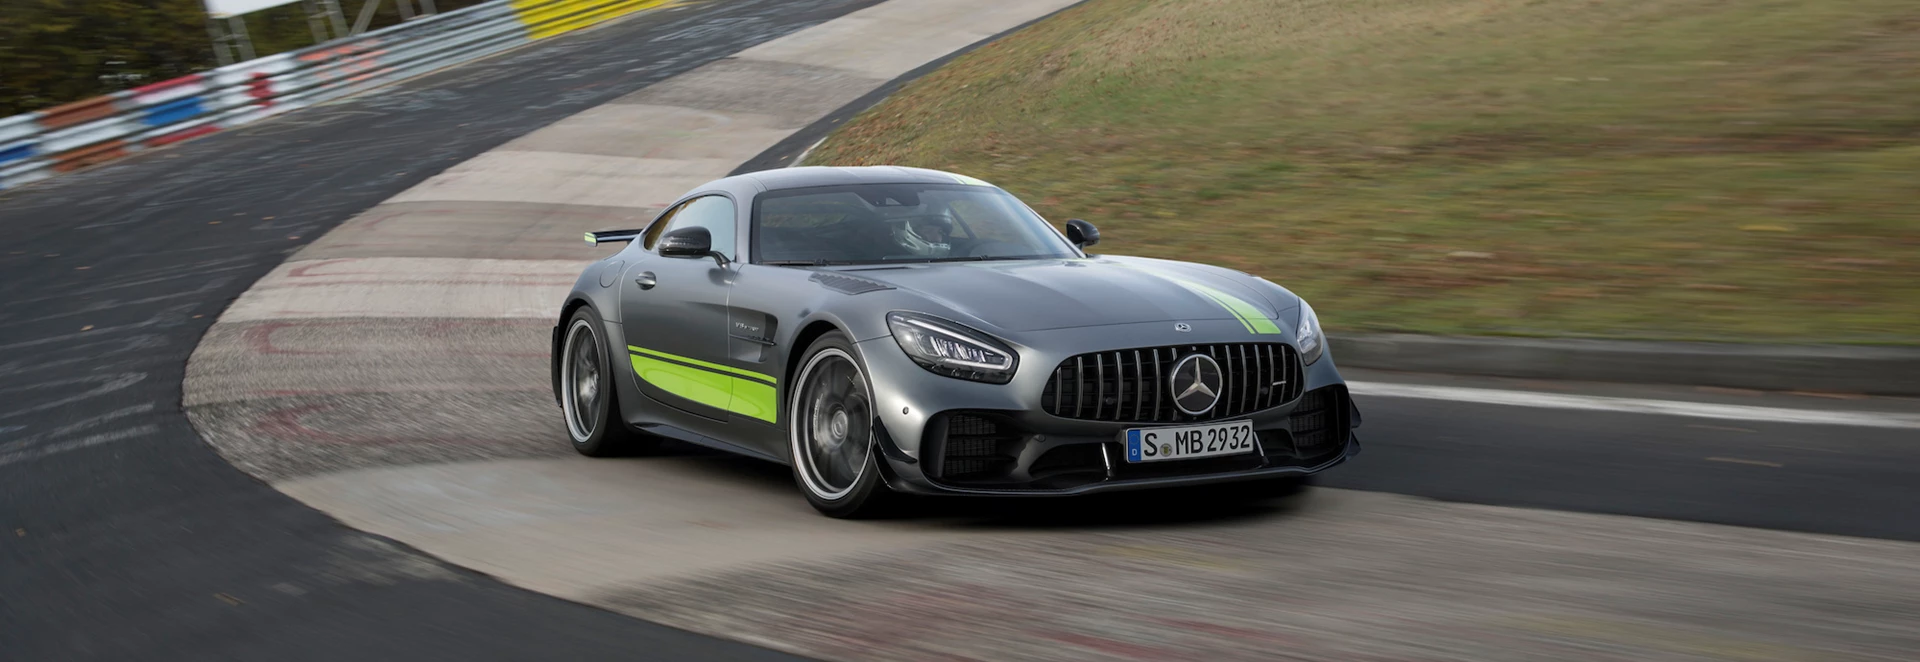 Mercedes-AMG unveils limited edition GT R Pro